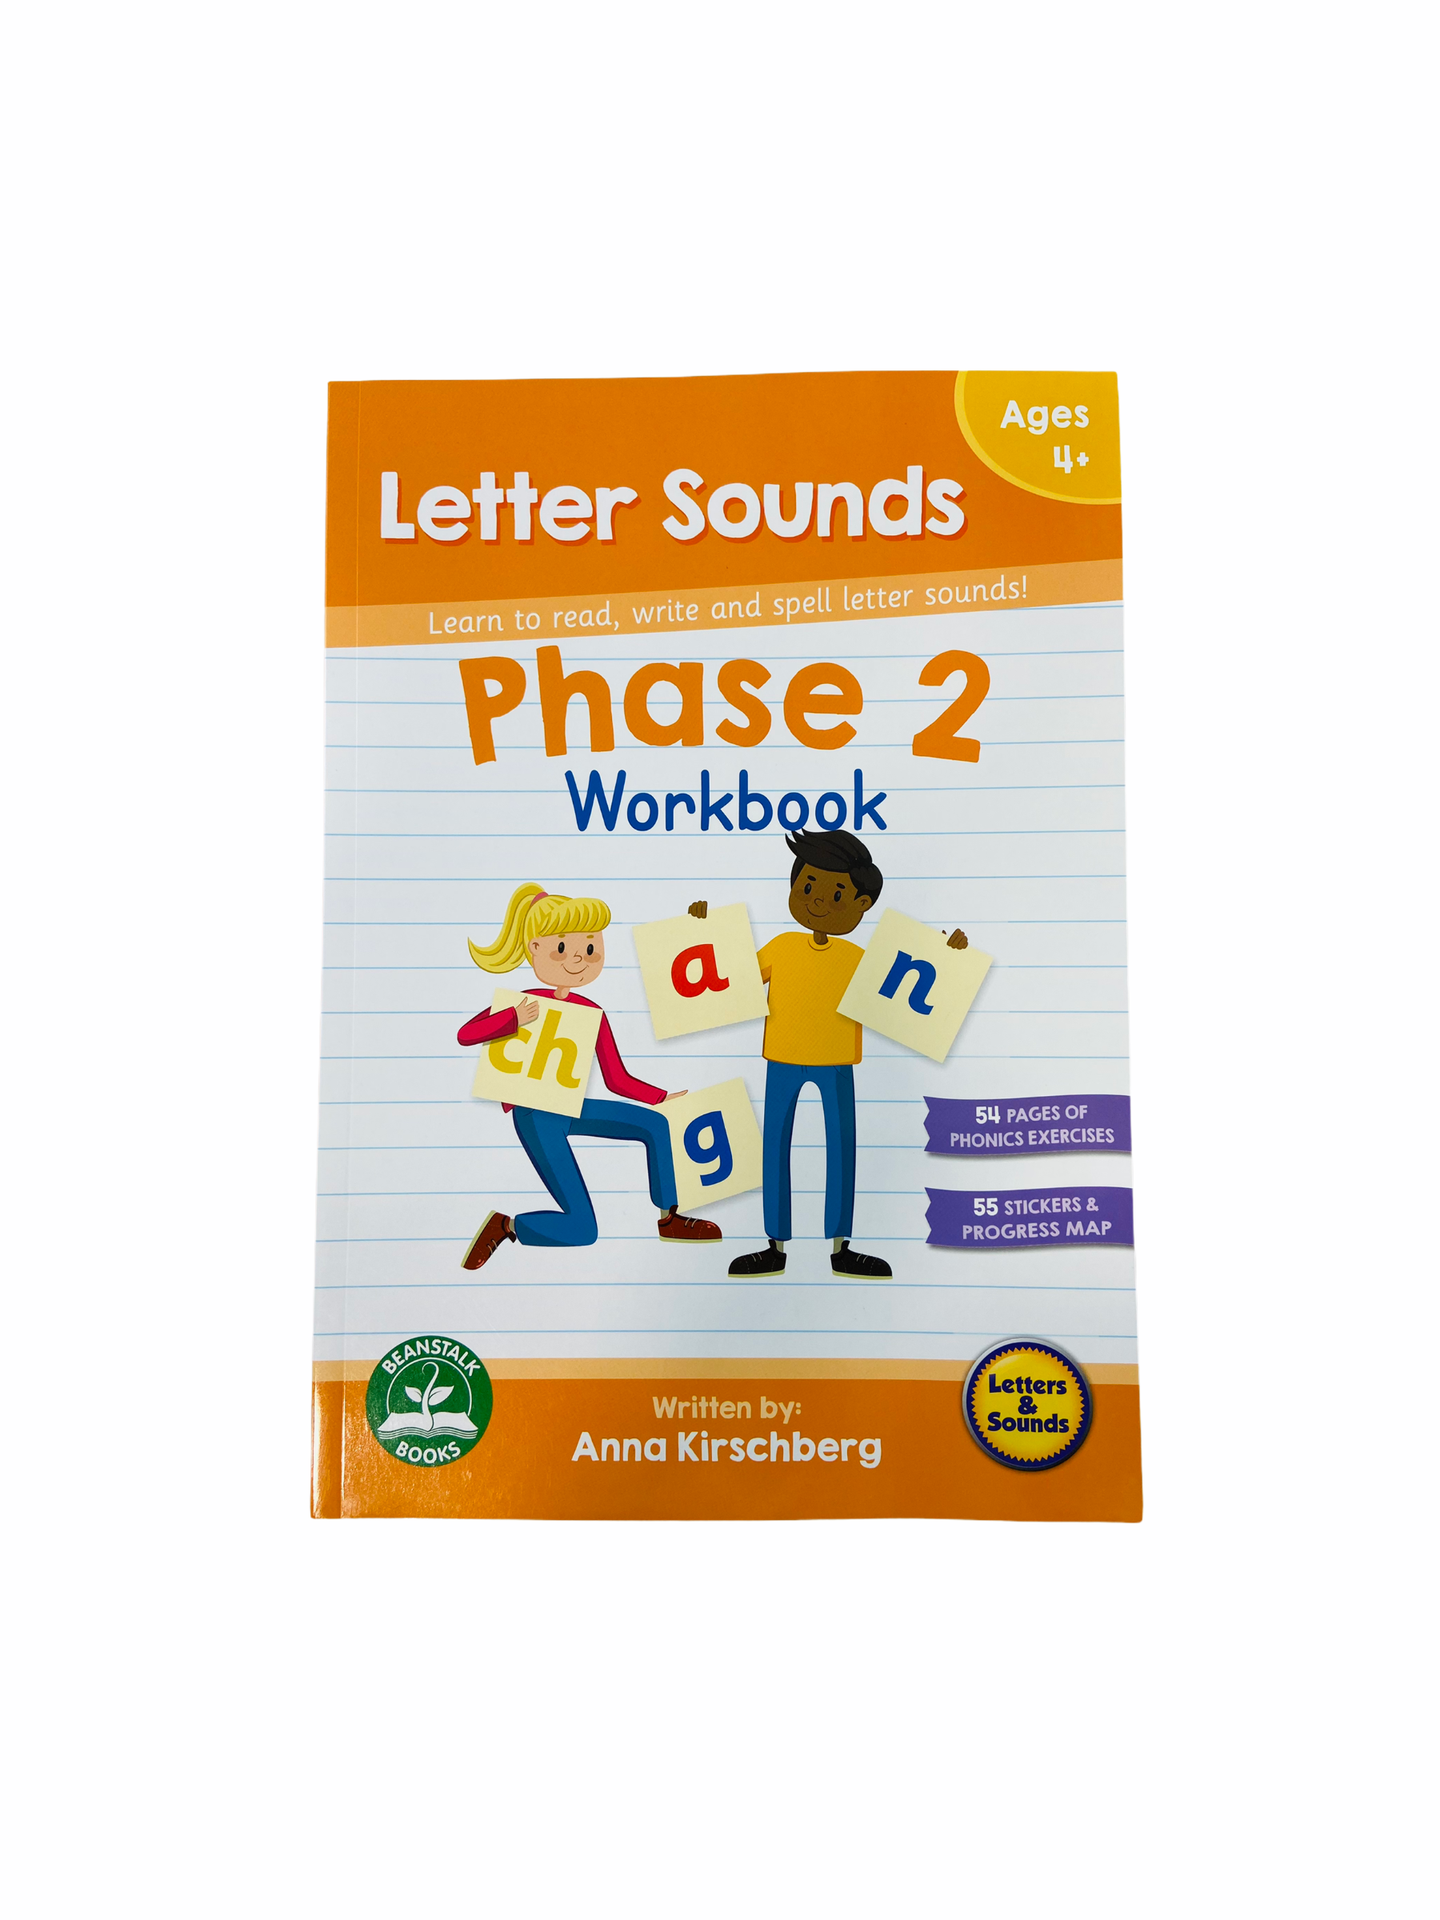 Phase 2 Workbook - Letter Sounds front cover with orange boarder showing a girl and a boy holding up letters